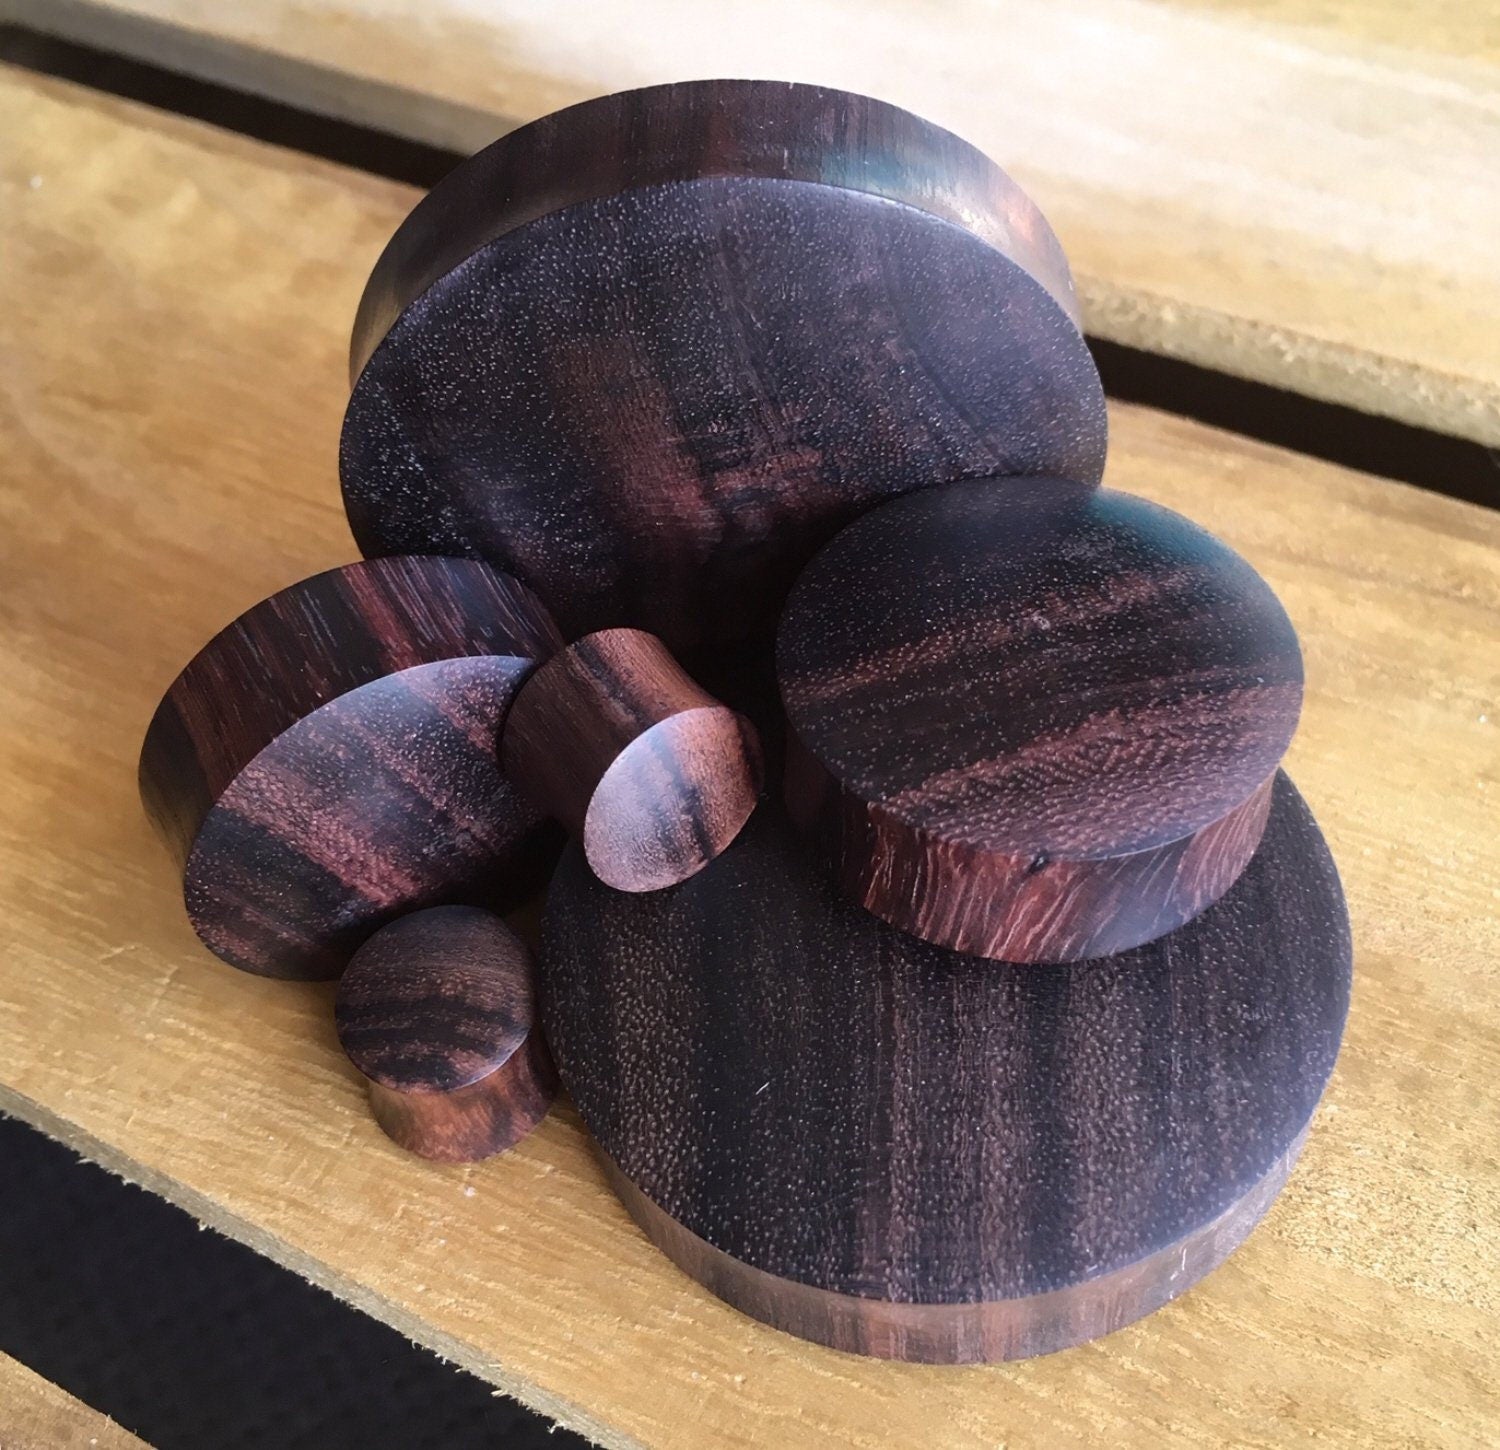 PAIR of Organic Brown Sono Wood Plugs - Gauges 2g (6mm) up to 2" (50mm) available!